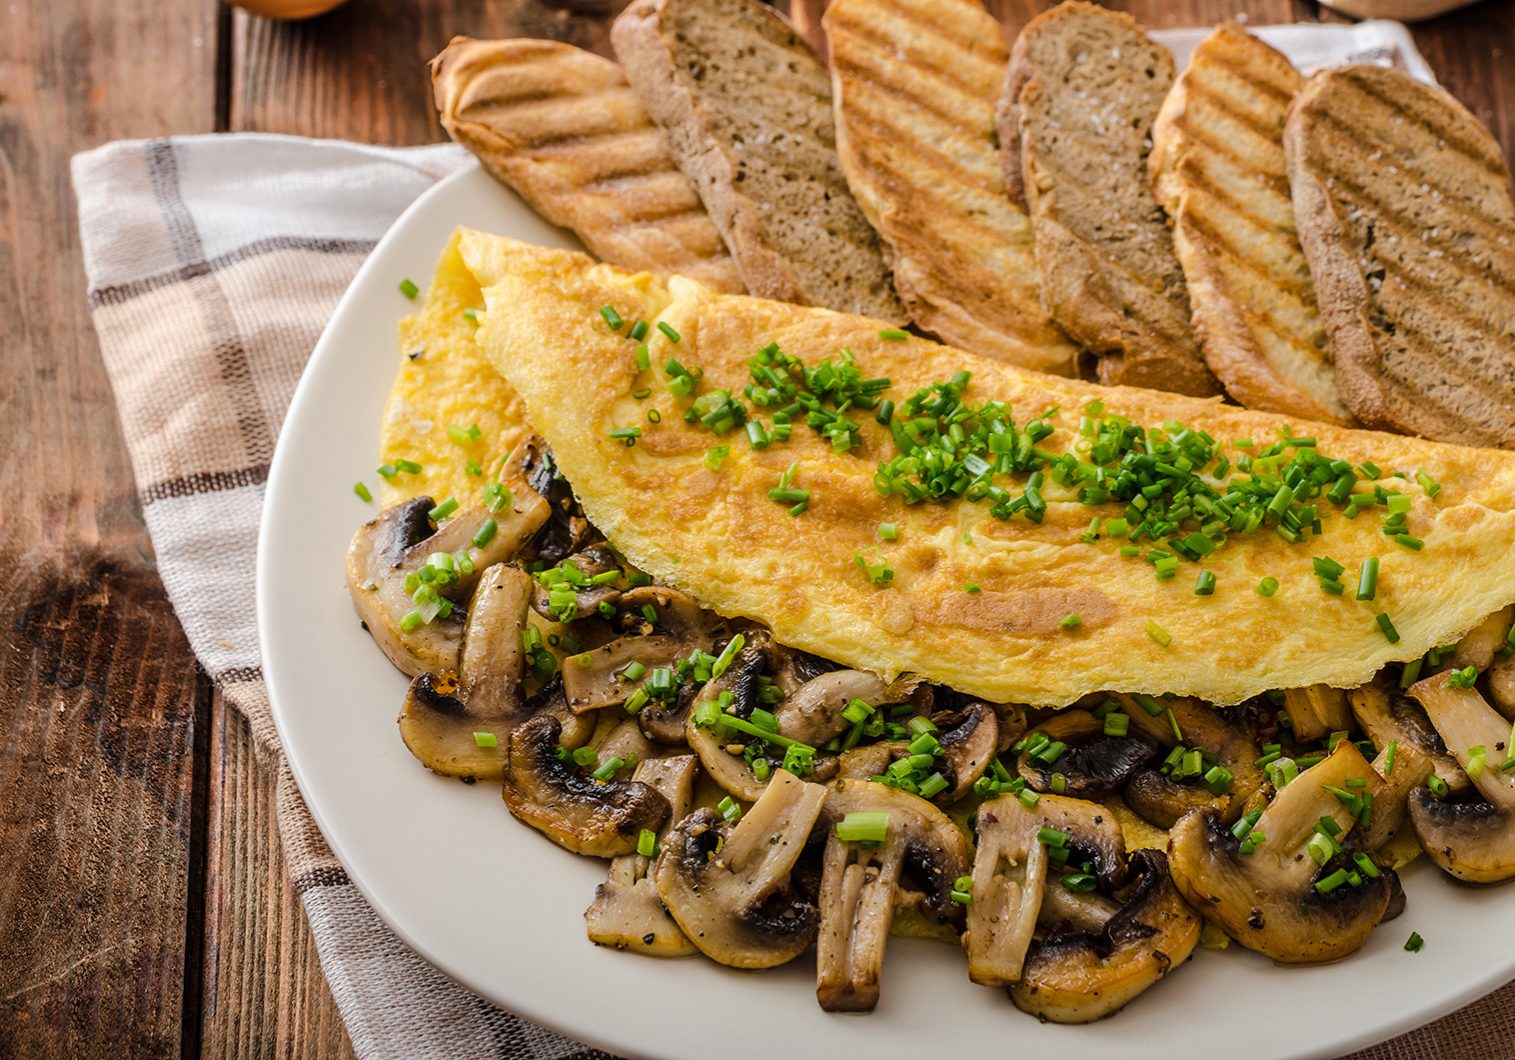 Rustic omelette with mushrooms on chives, roasted panini health bread